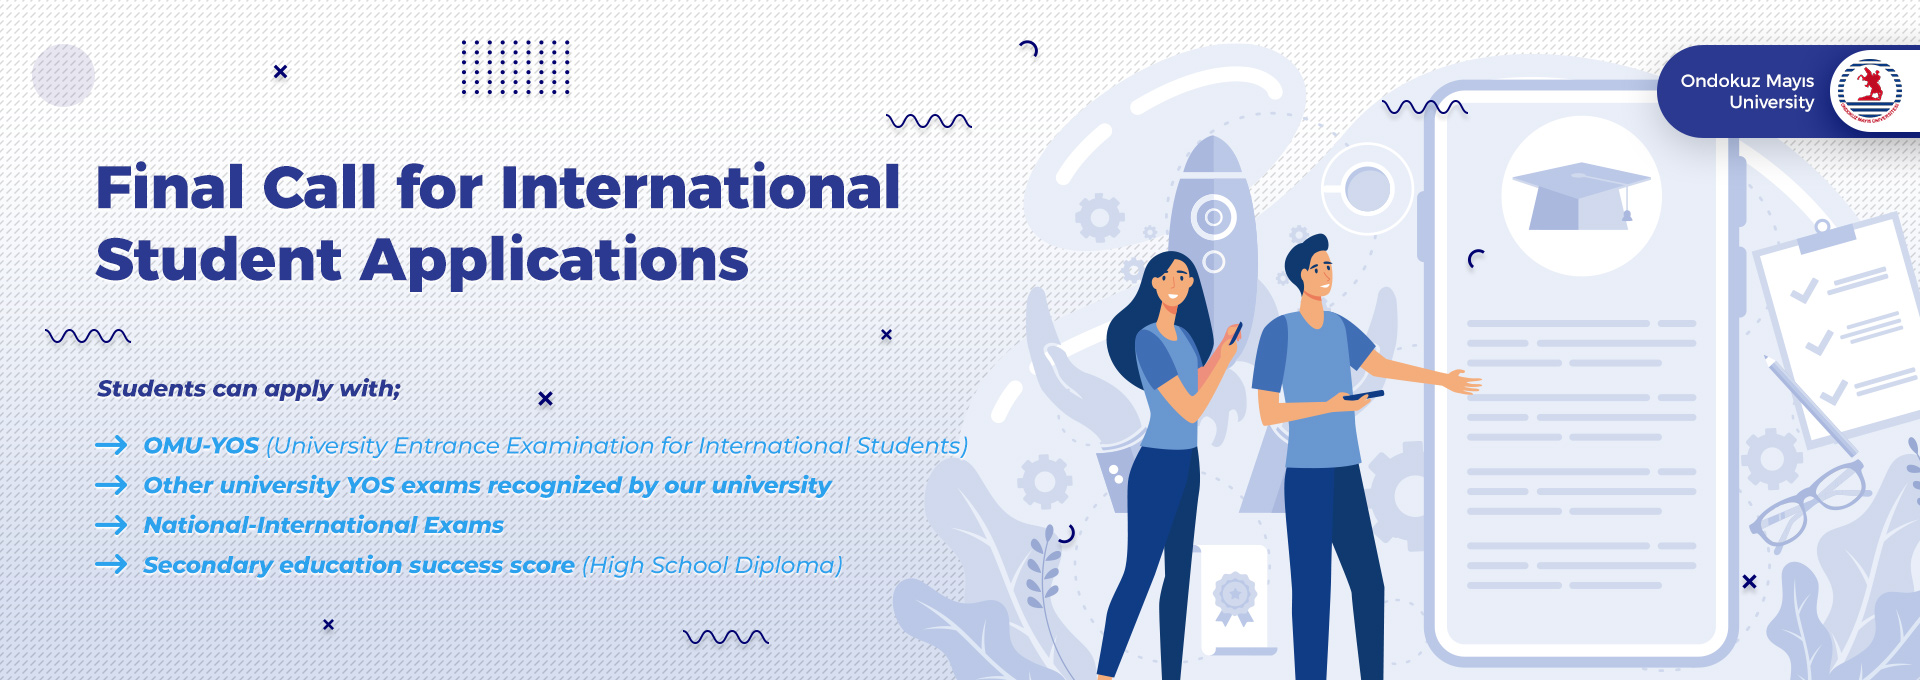 Final Call for International Student Applications 